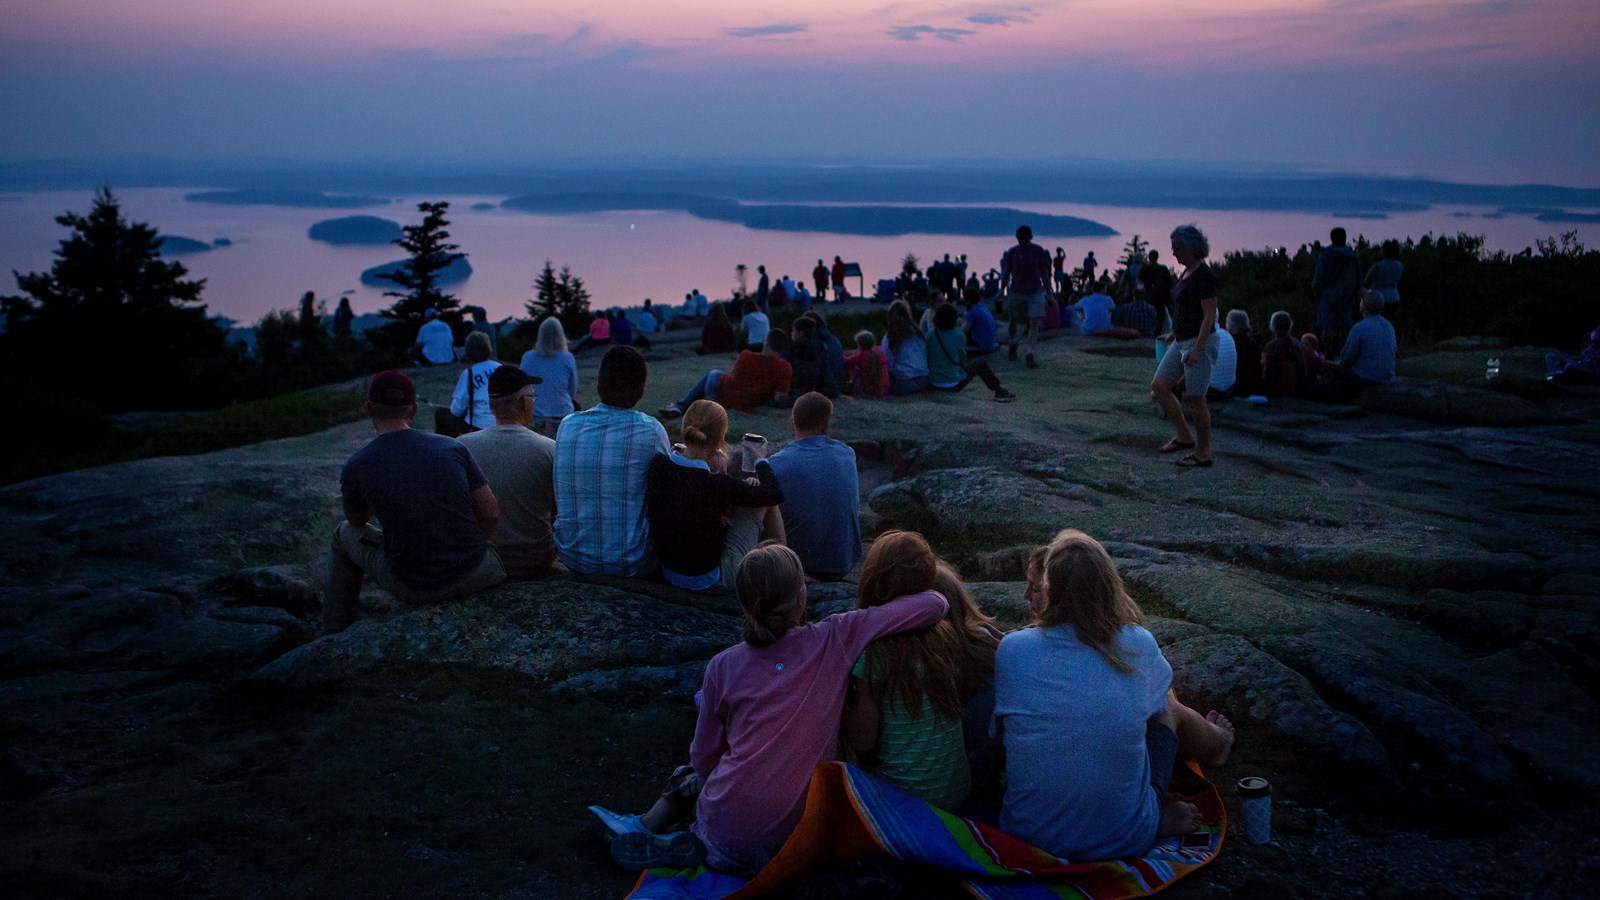 Groups of people sit on a granite outcropping, looking out at a view of sunrise over ocean.